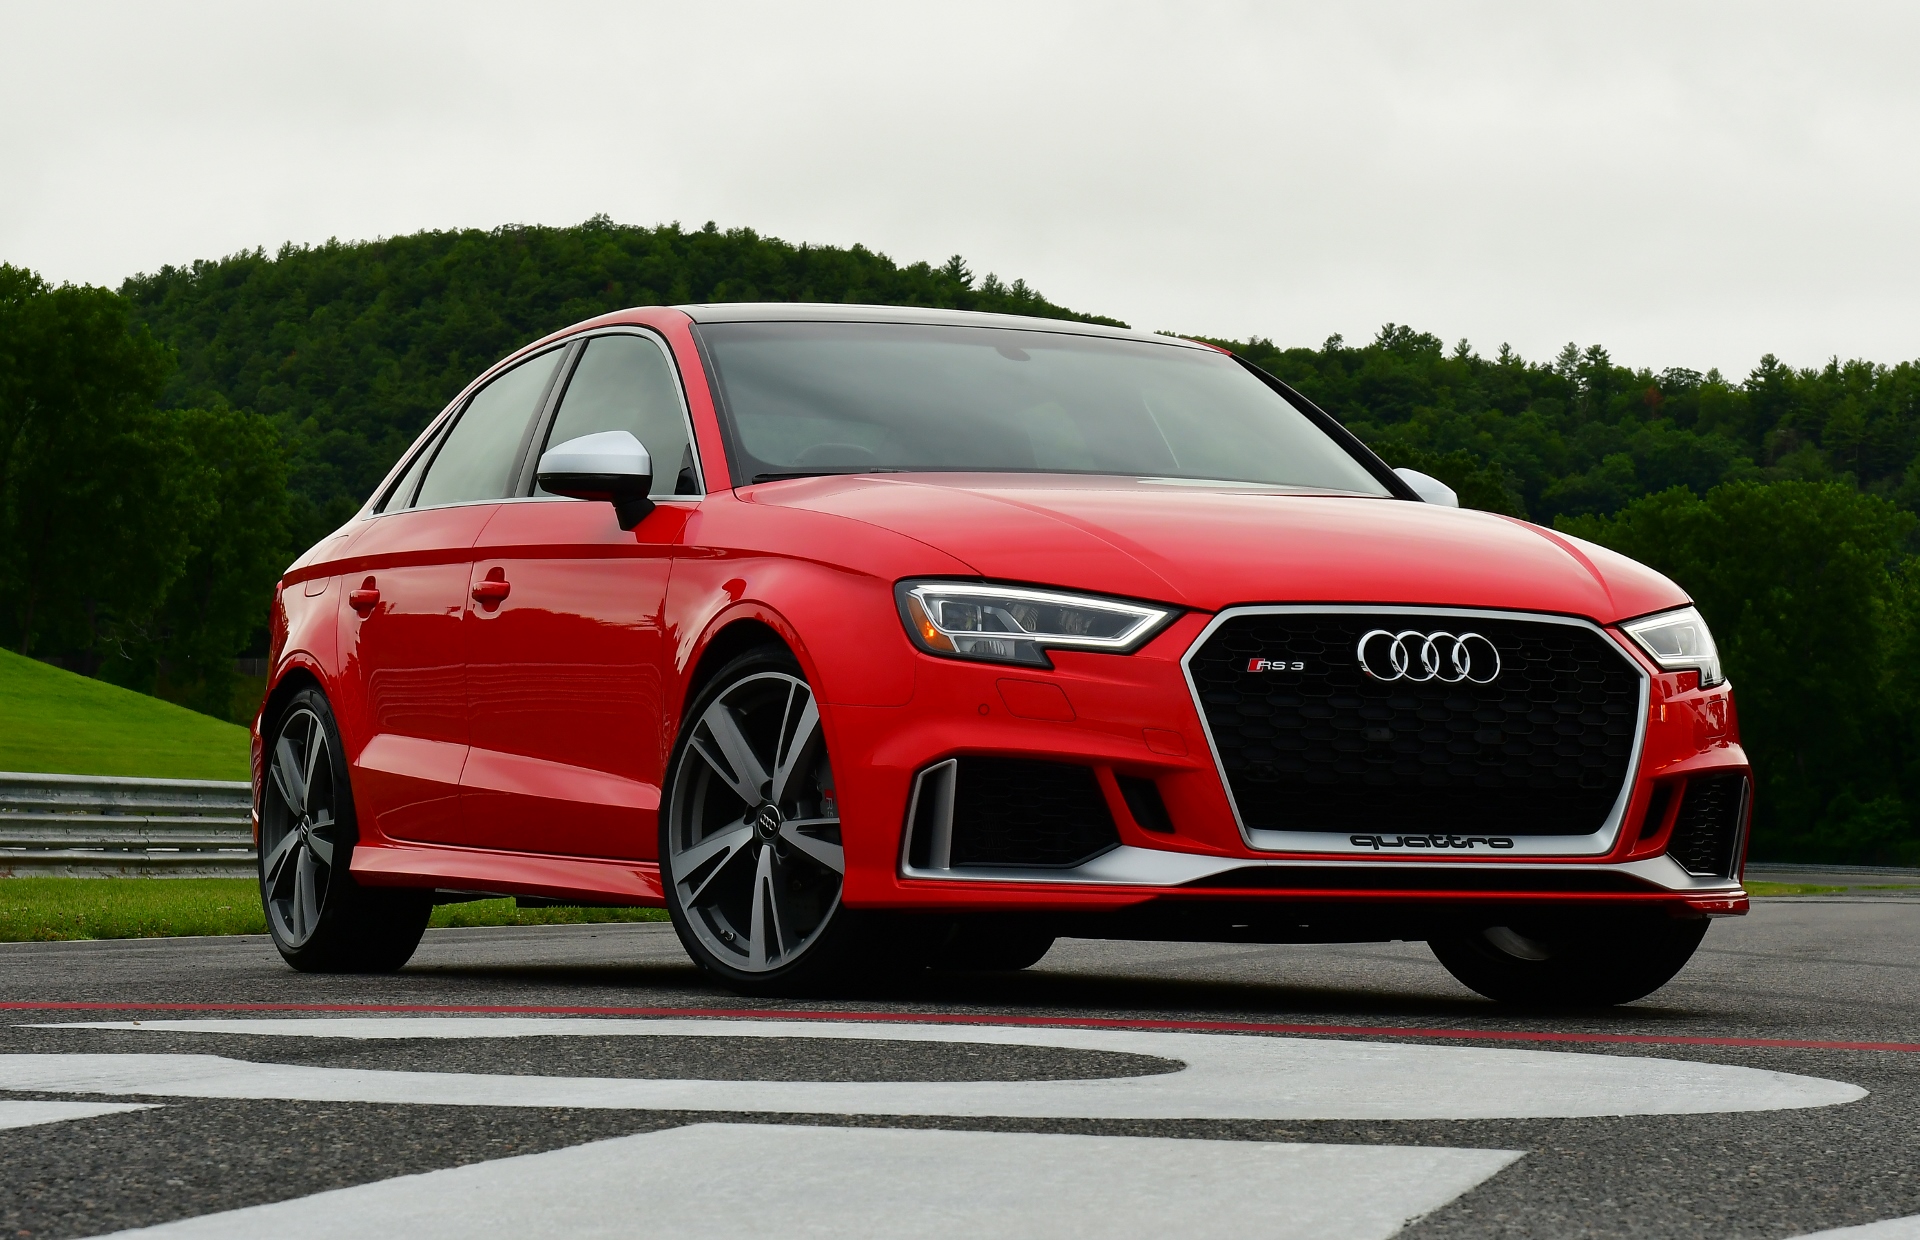 2018 Audi RS 3 first drive review: Less money, but no less fun